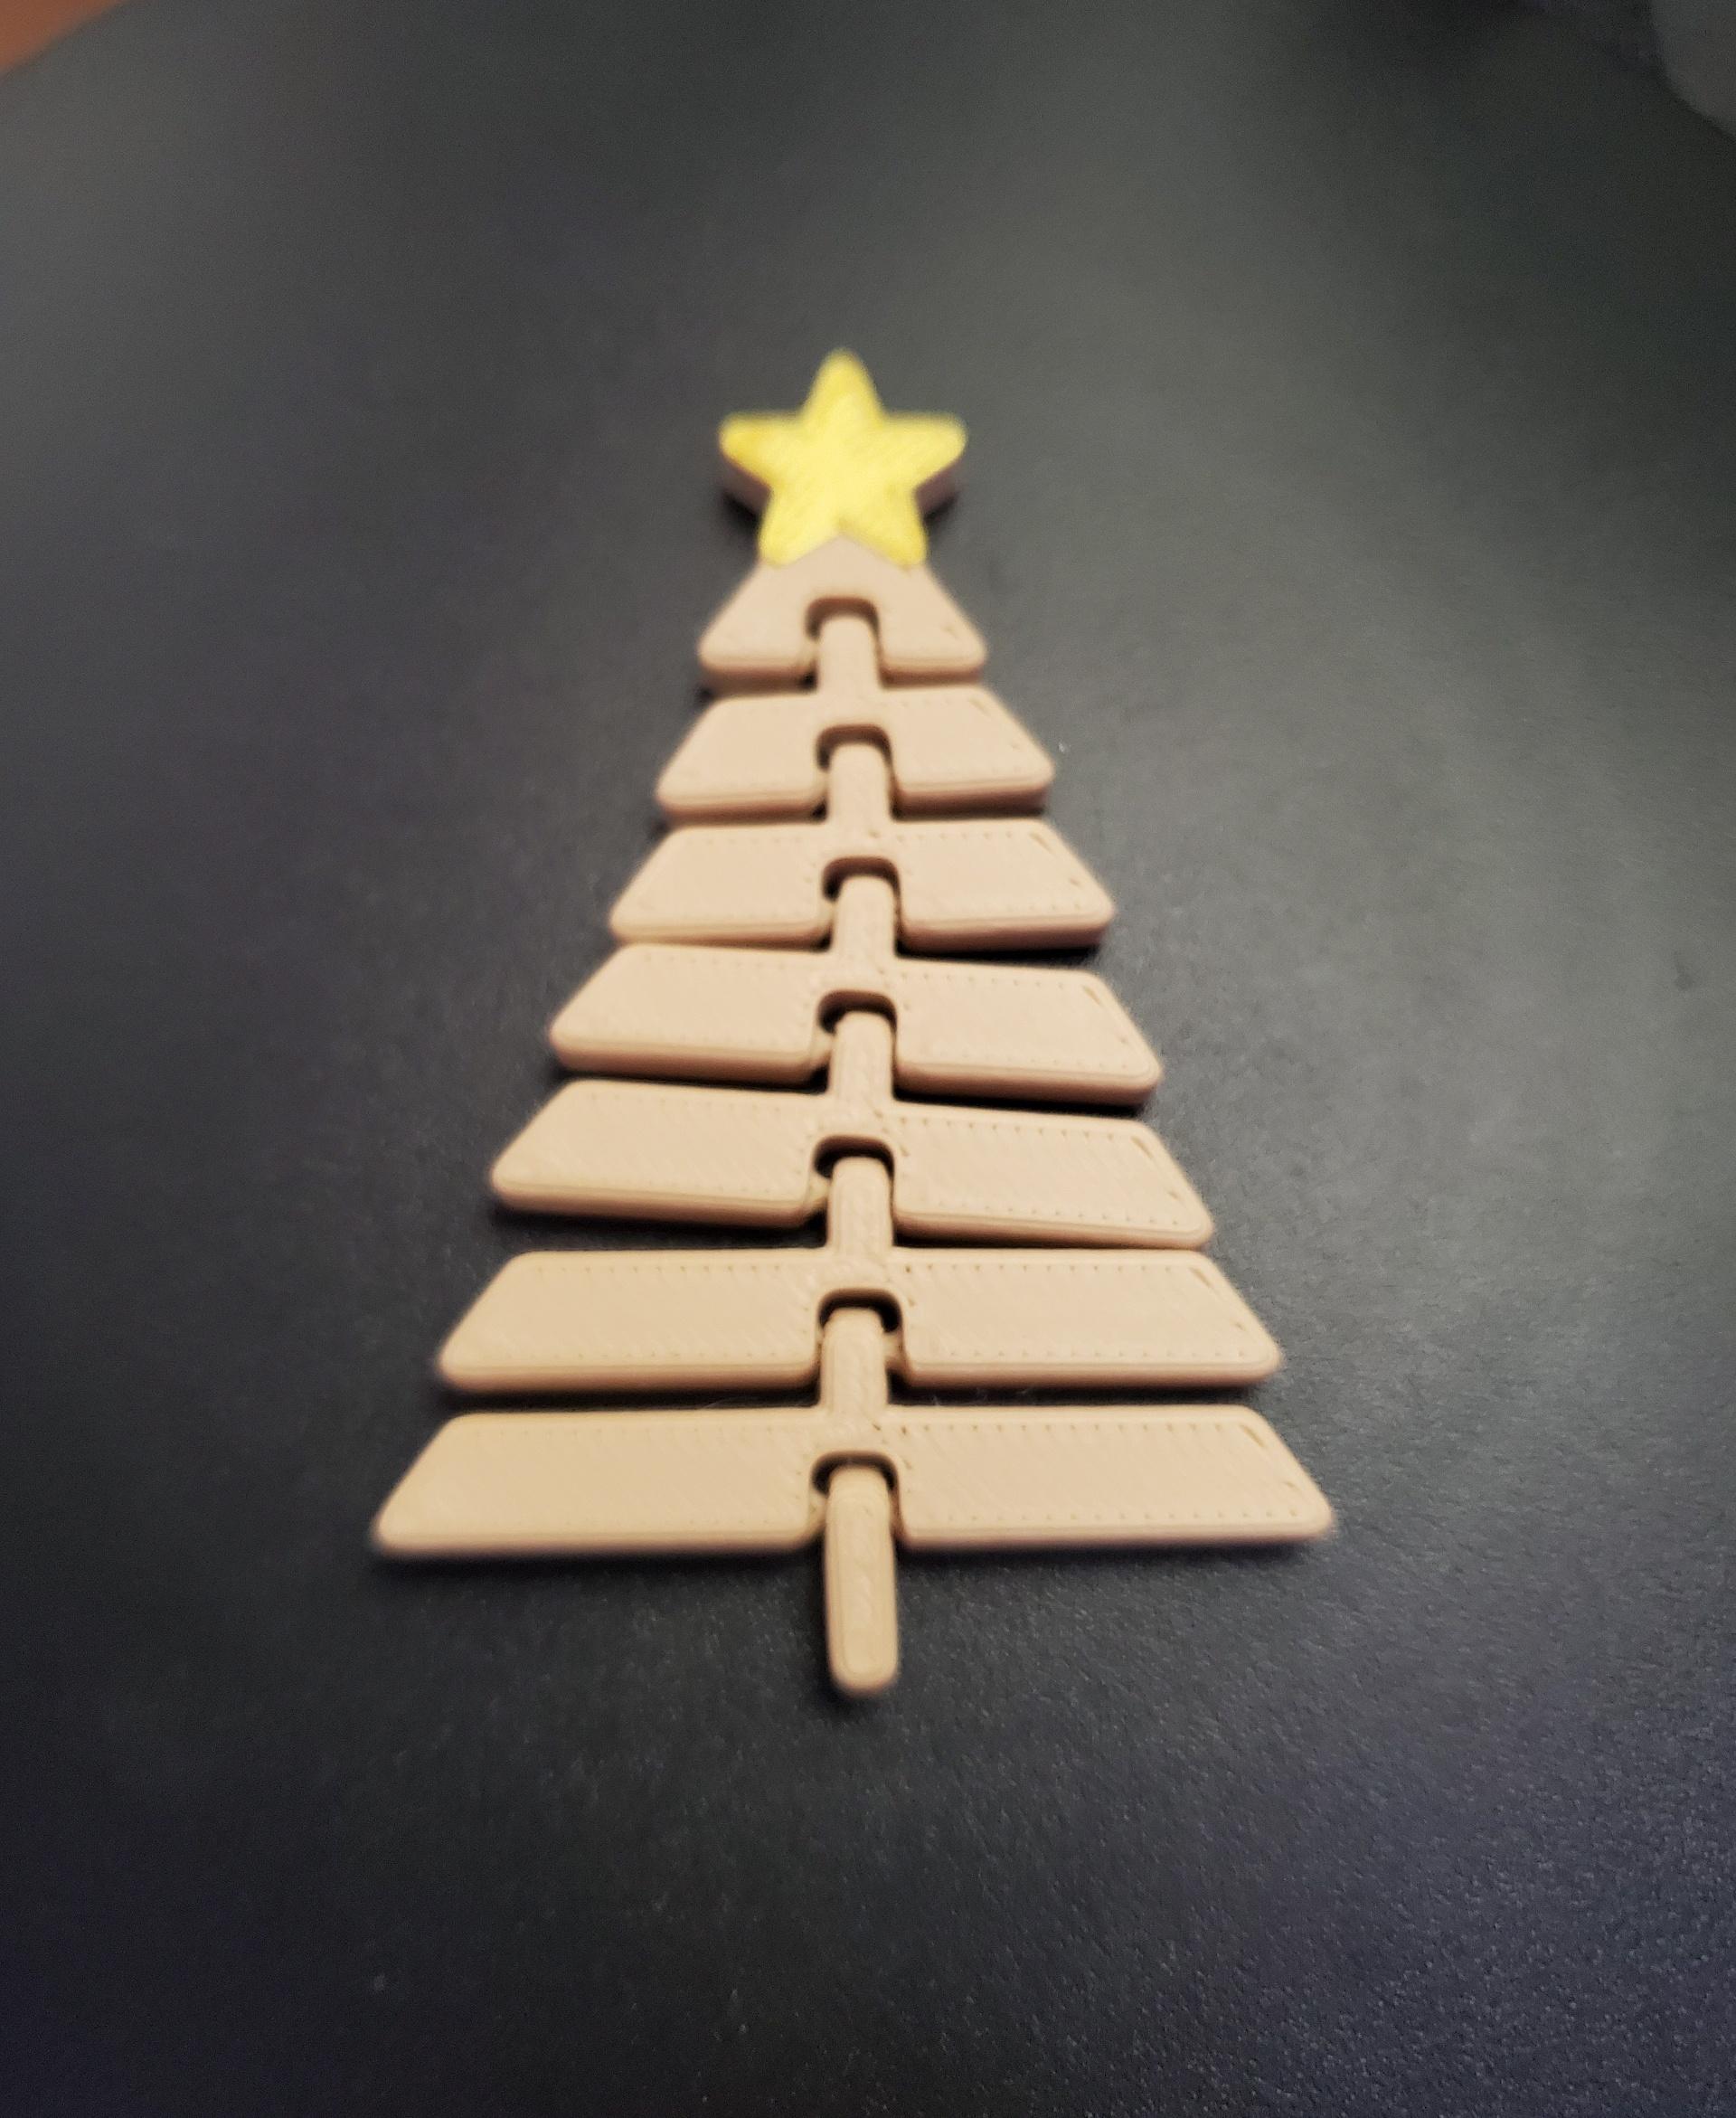 Articulated Christmas Tree with Star - Print in place fidget toy - 3mf - polyterra peanut - 3d model